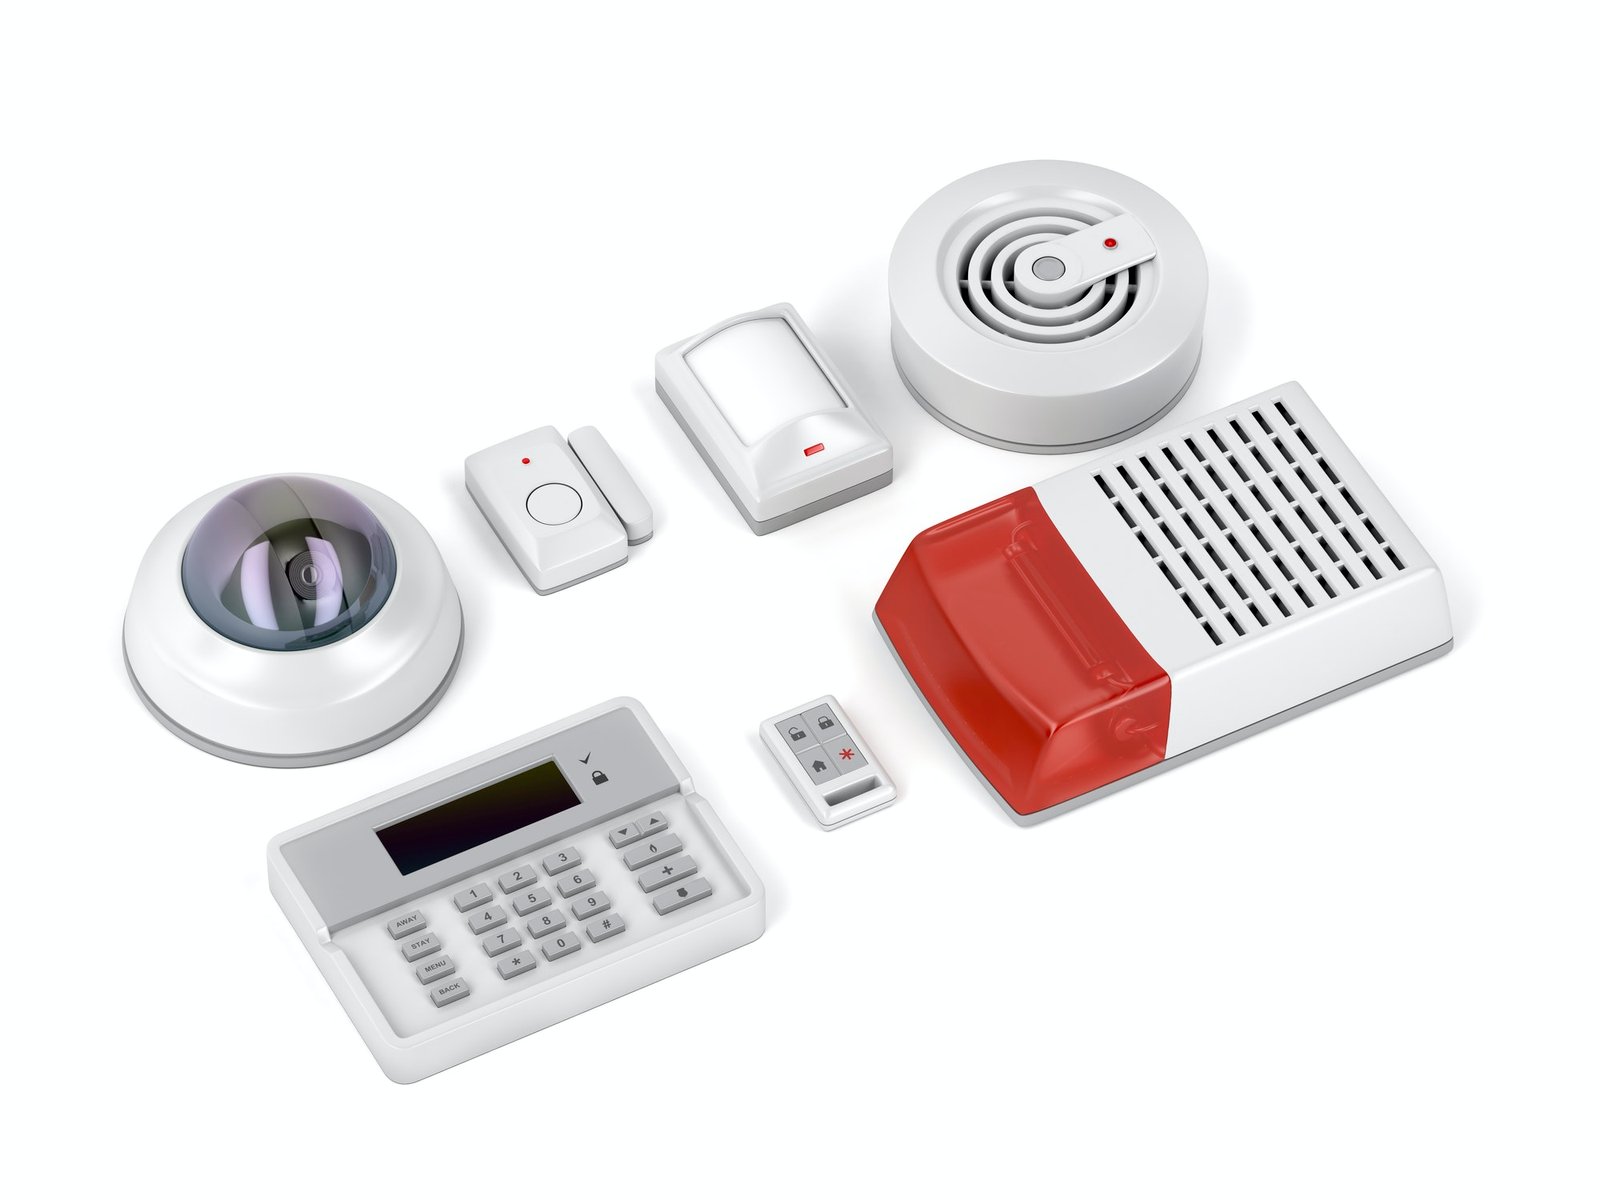 Home security electronic devices